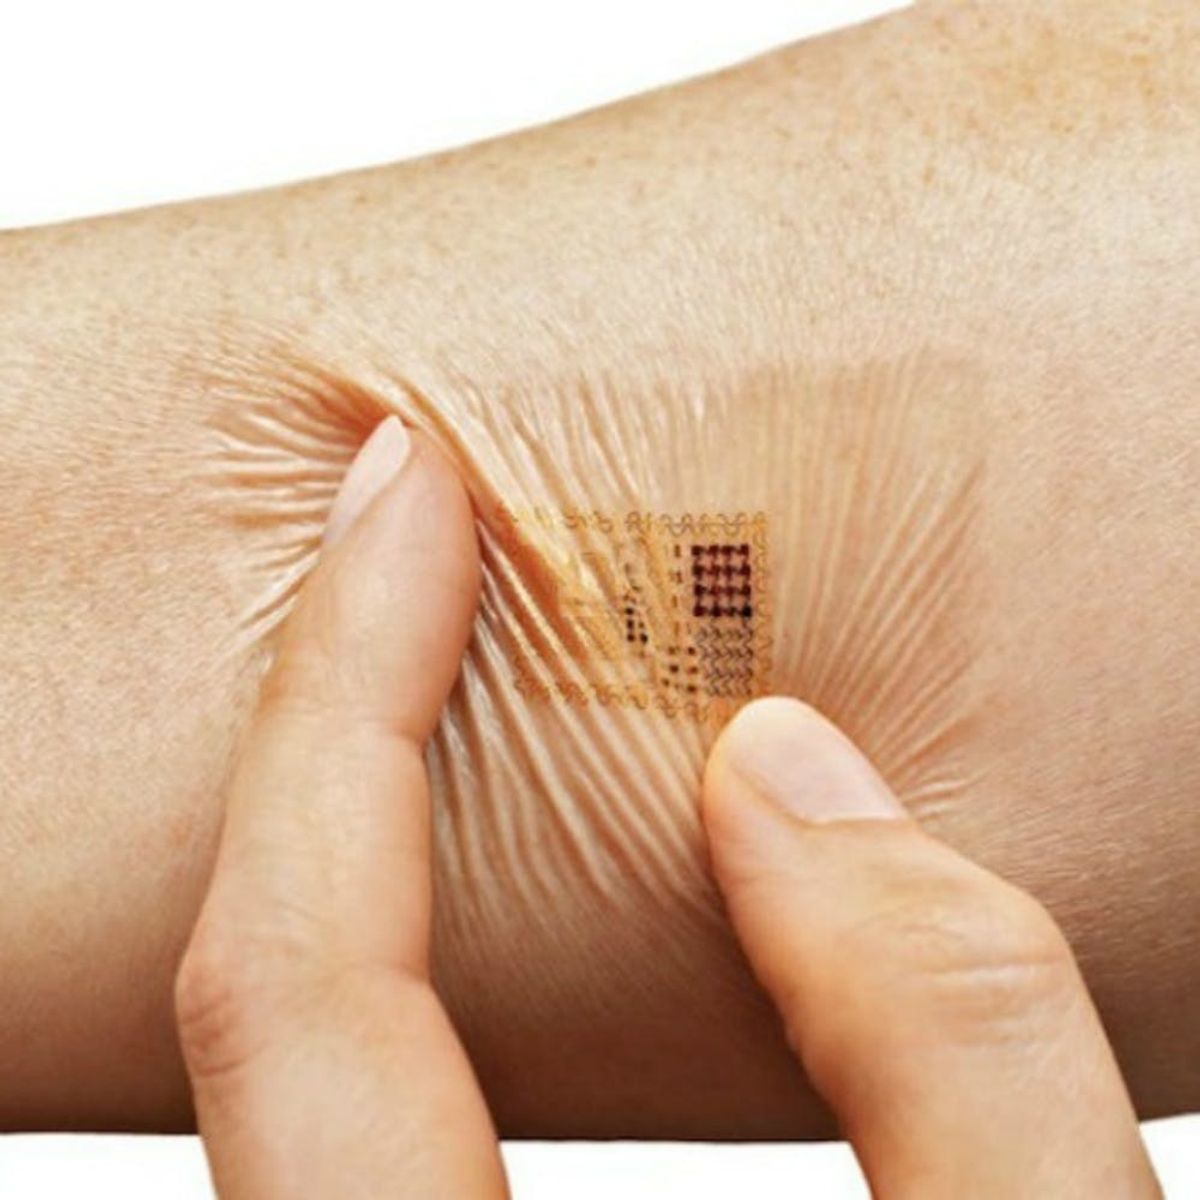 This Smart Bandage Monitors Your Heart Rate, Temp + More